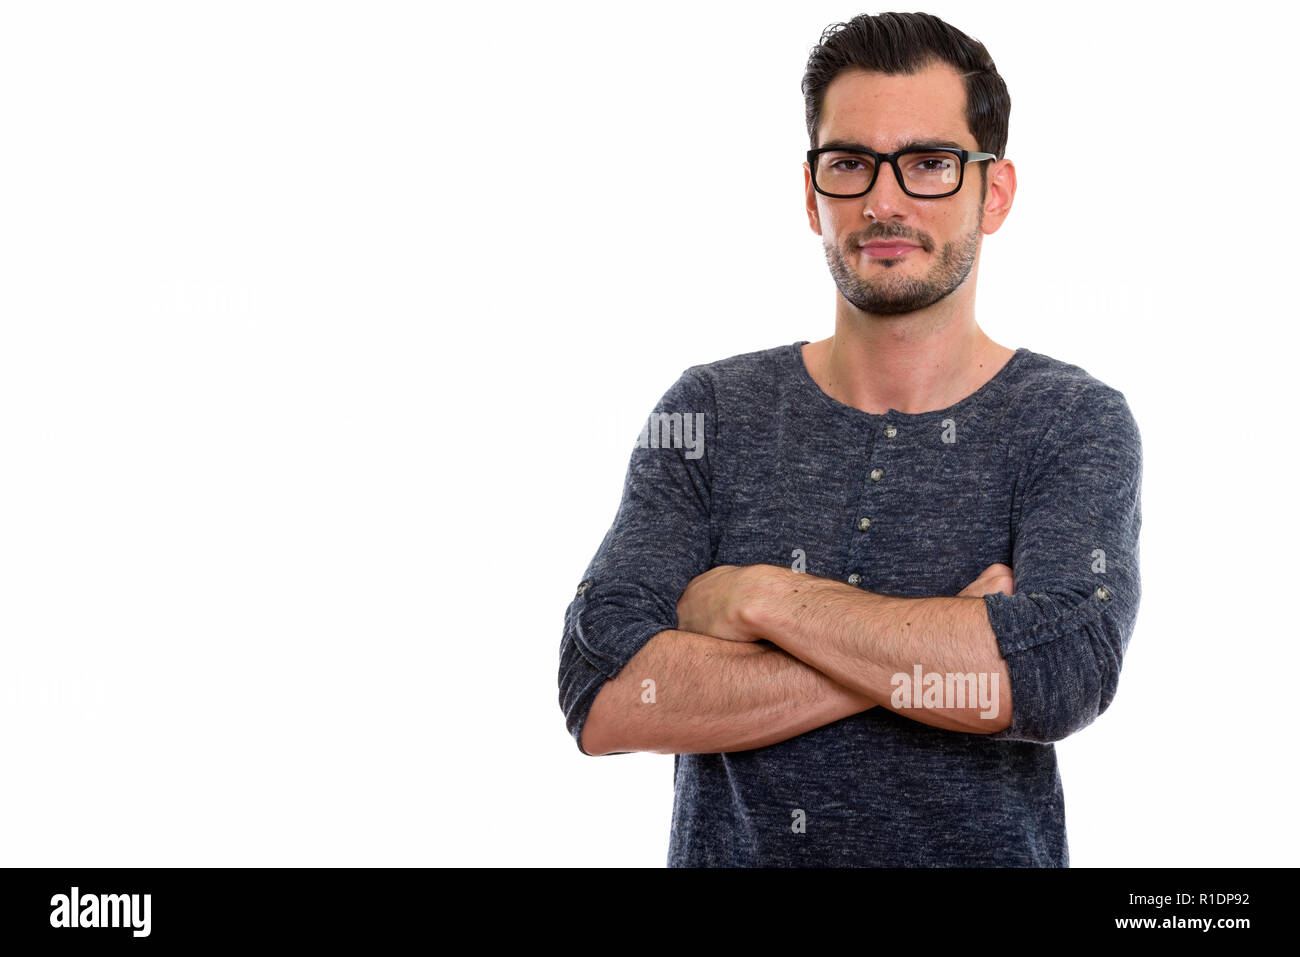 Studio shot of young man wearing eyeglasses with arms c Banque D'Images